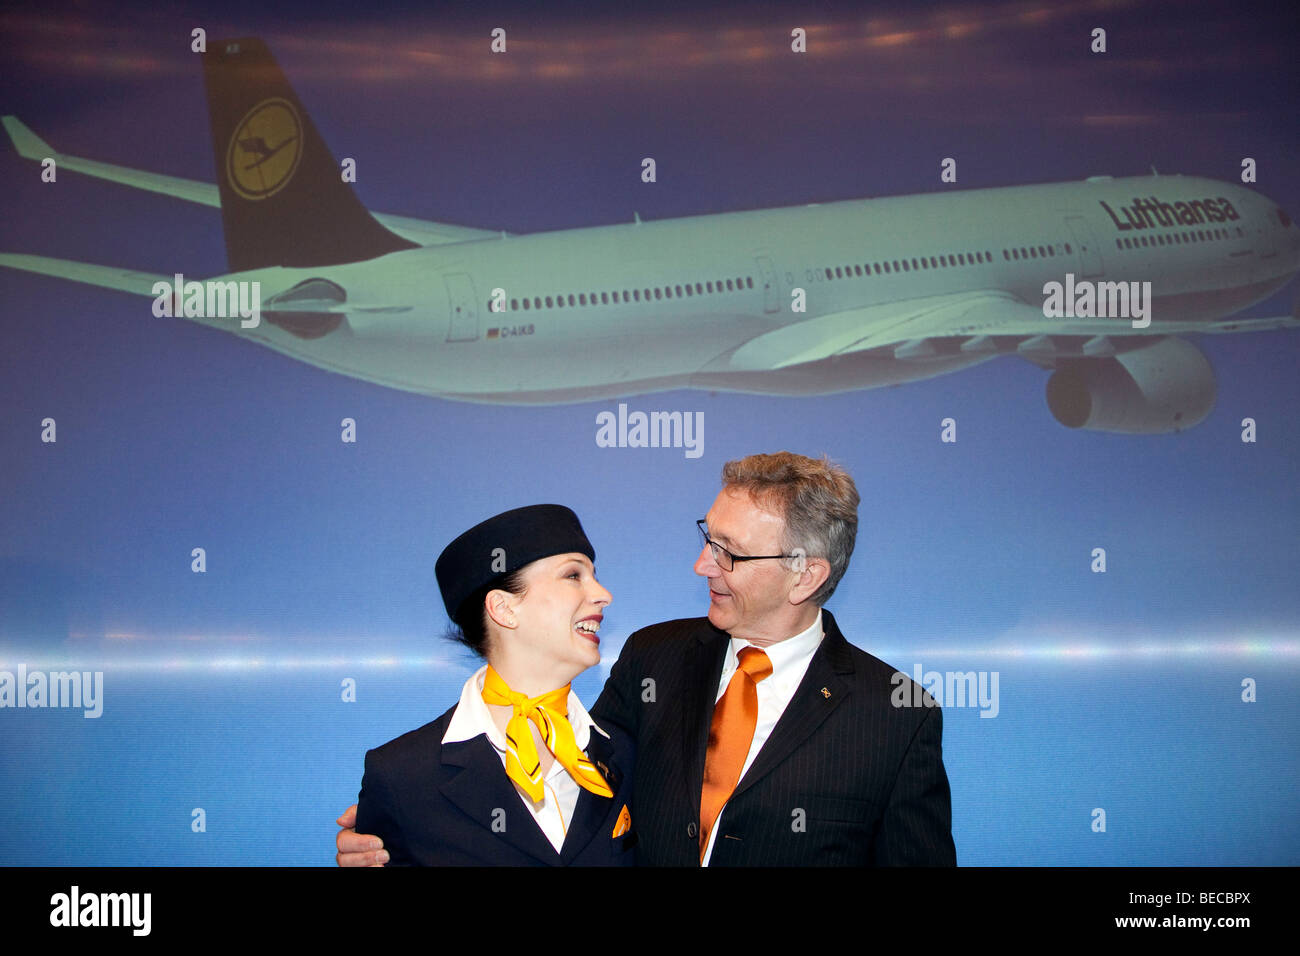 Wolfgang Mayrhuber, left, chairman and CEO of Deutsche Lufthansa AG, with flight attendant Heike Fischer, right, prior to the p Stock Photo